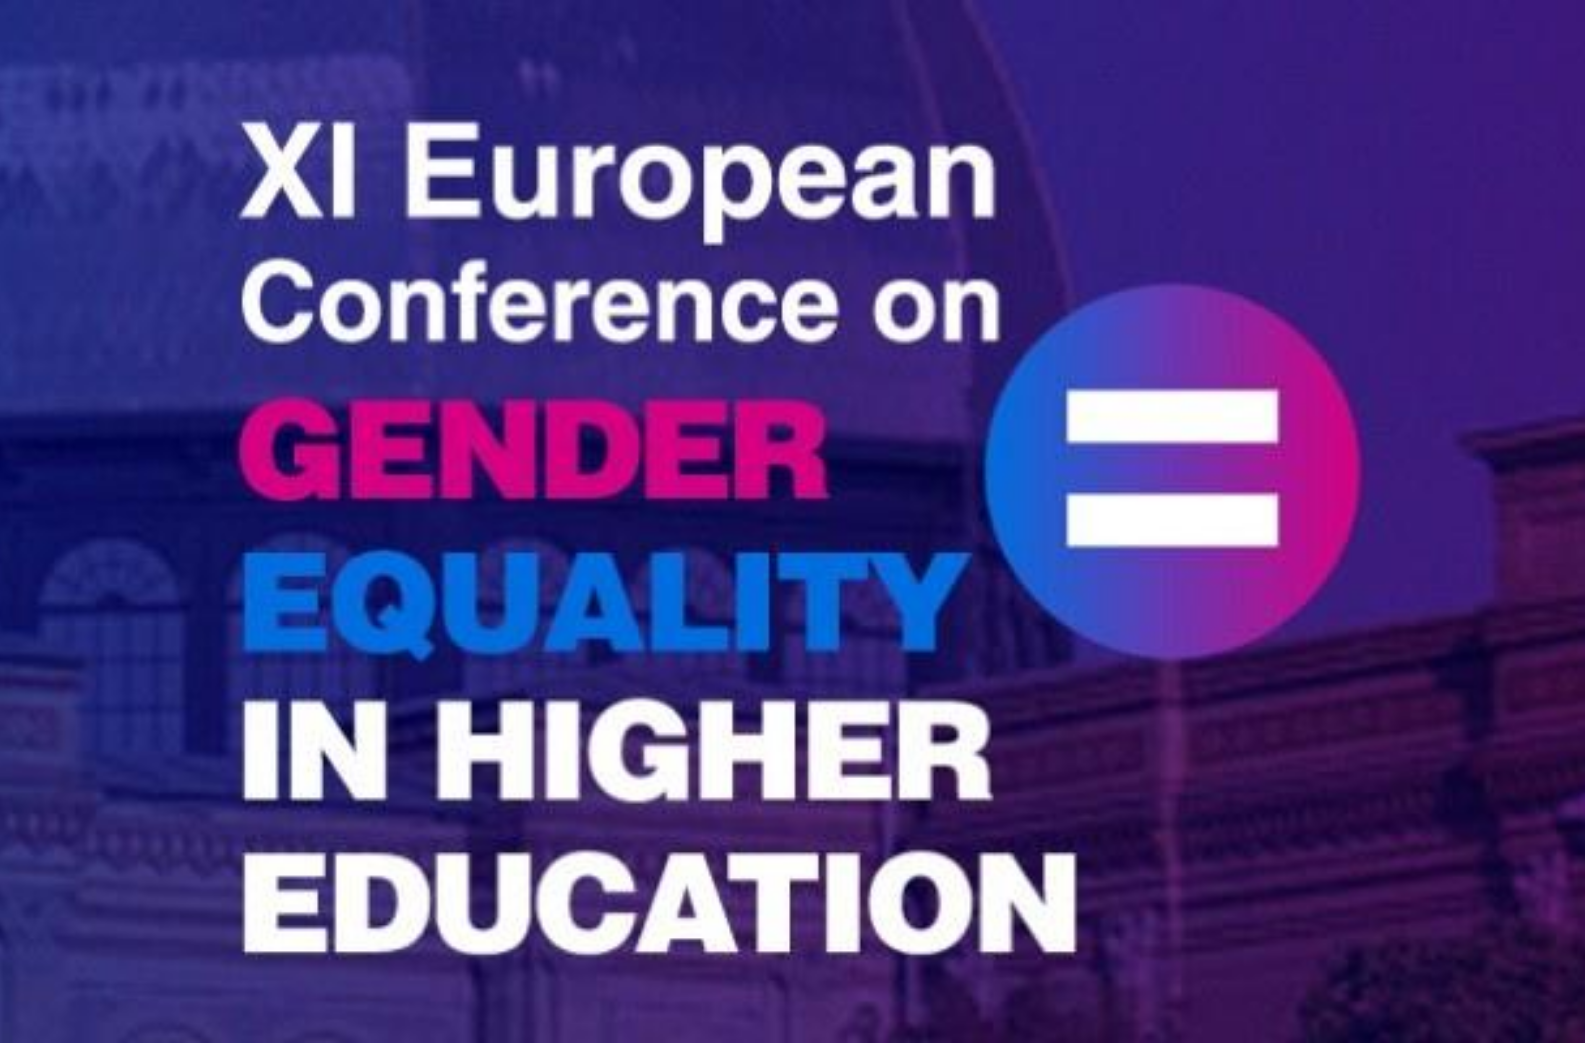 XI European Conference on Gender Equality in Higher Education